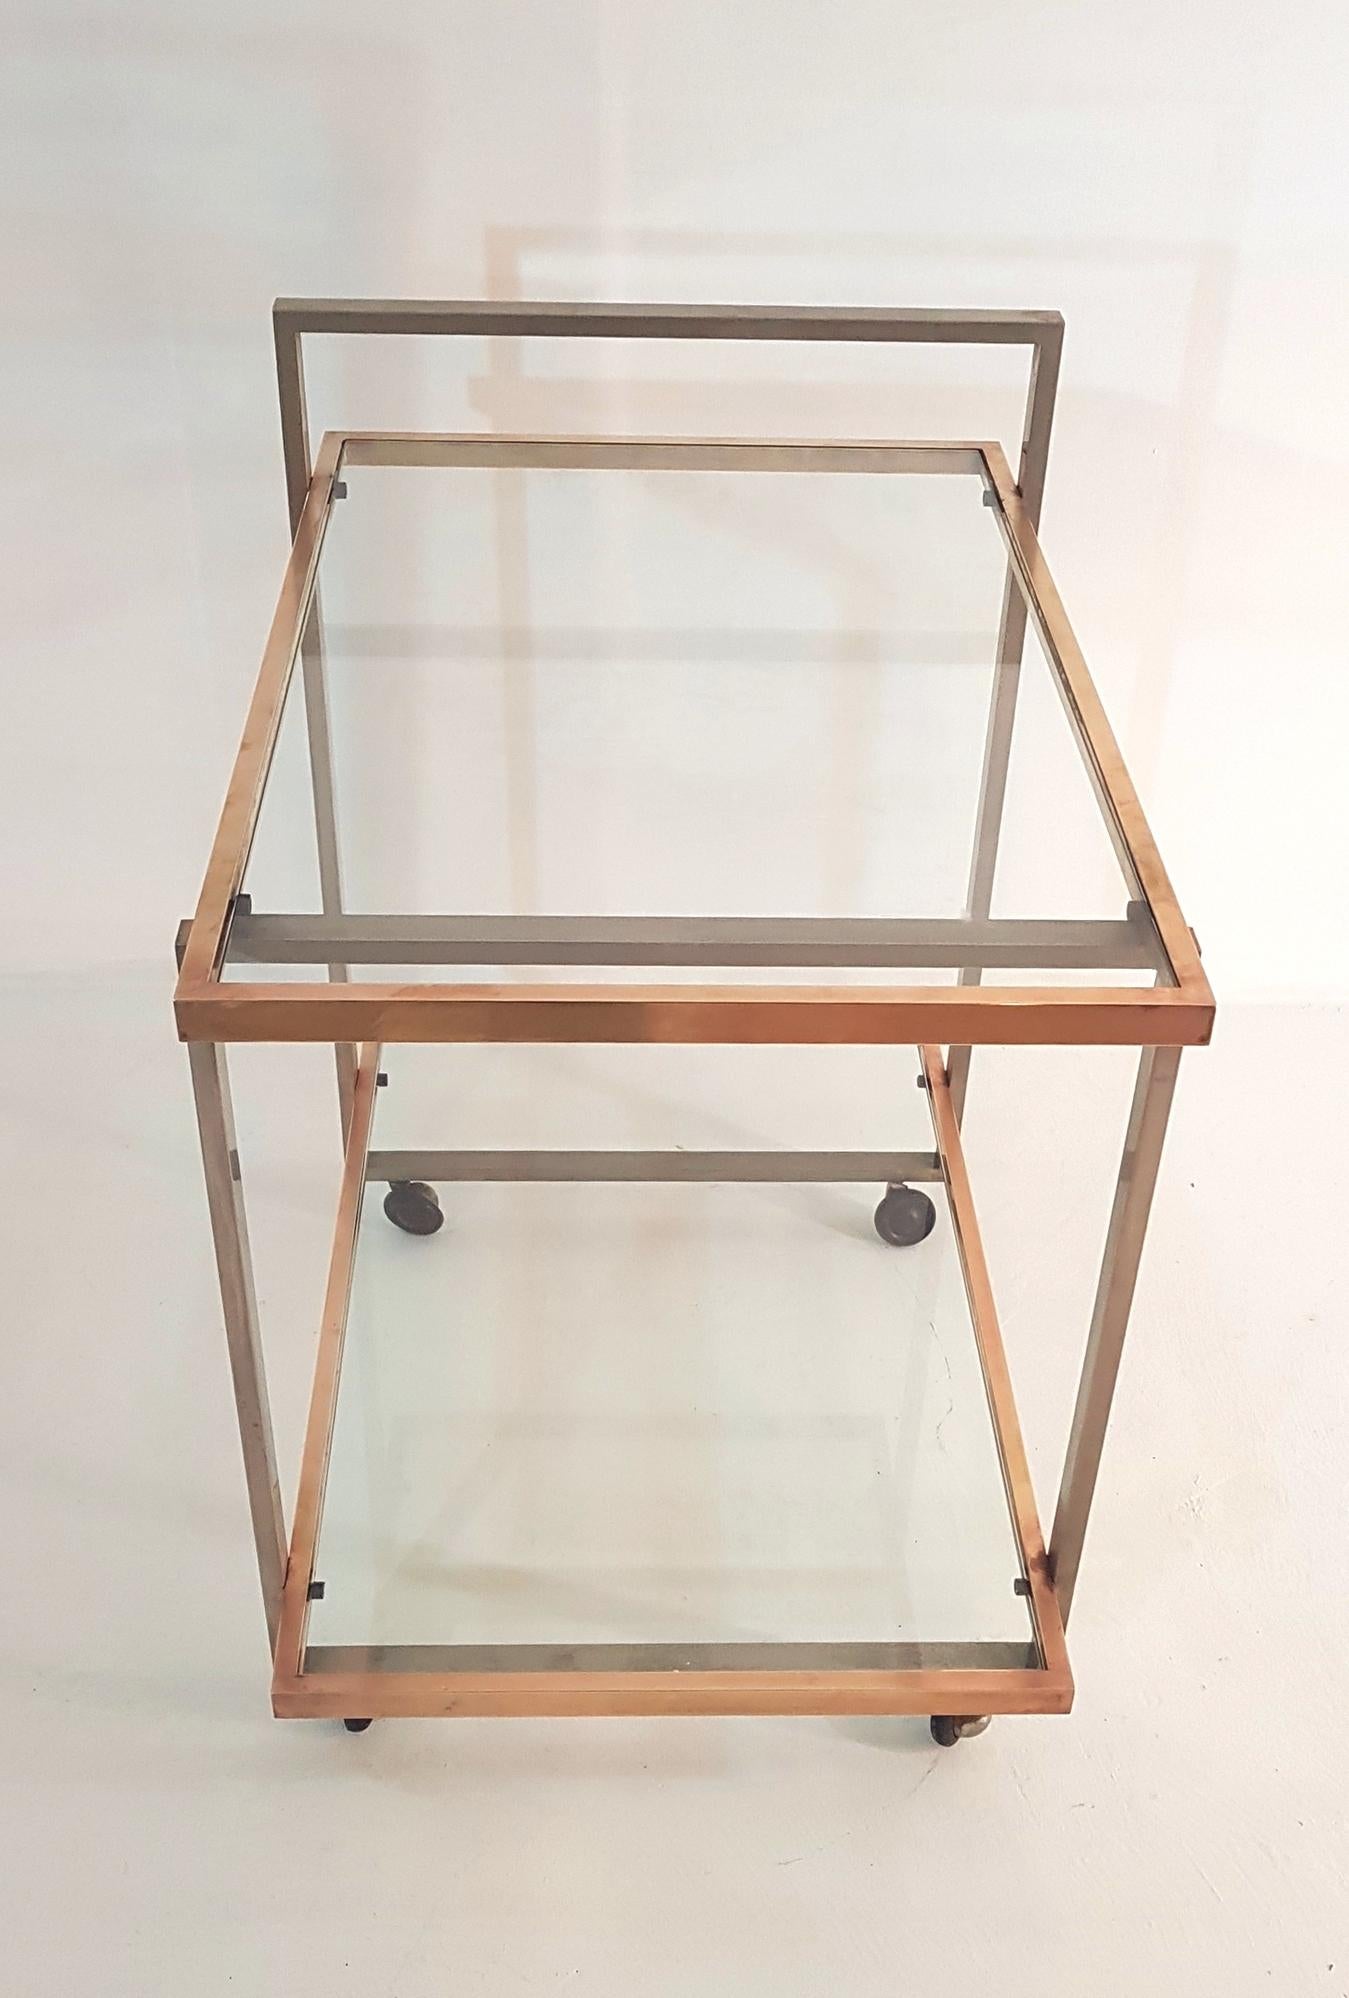 Elegant two-tiered bar cart with clear glass shelves. The wheels are original and work well.